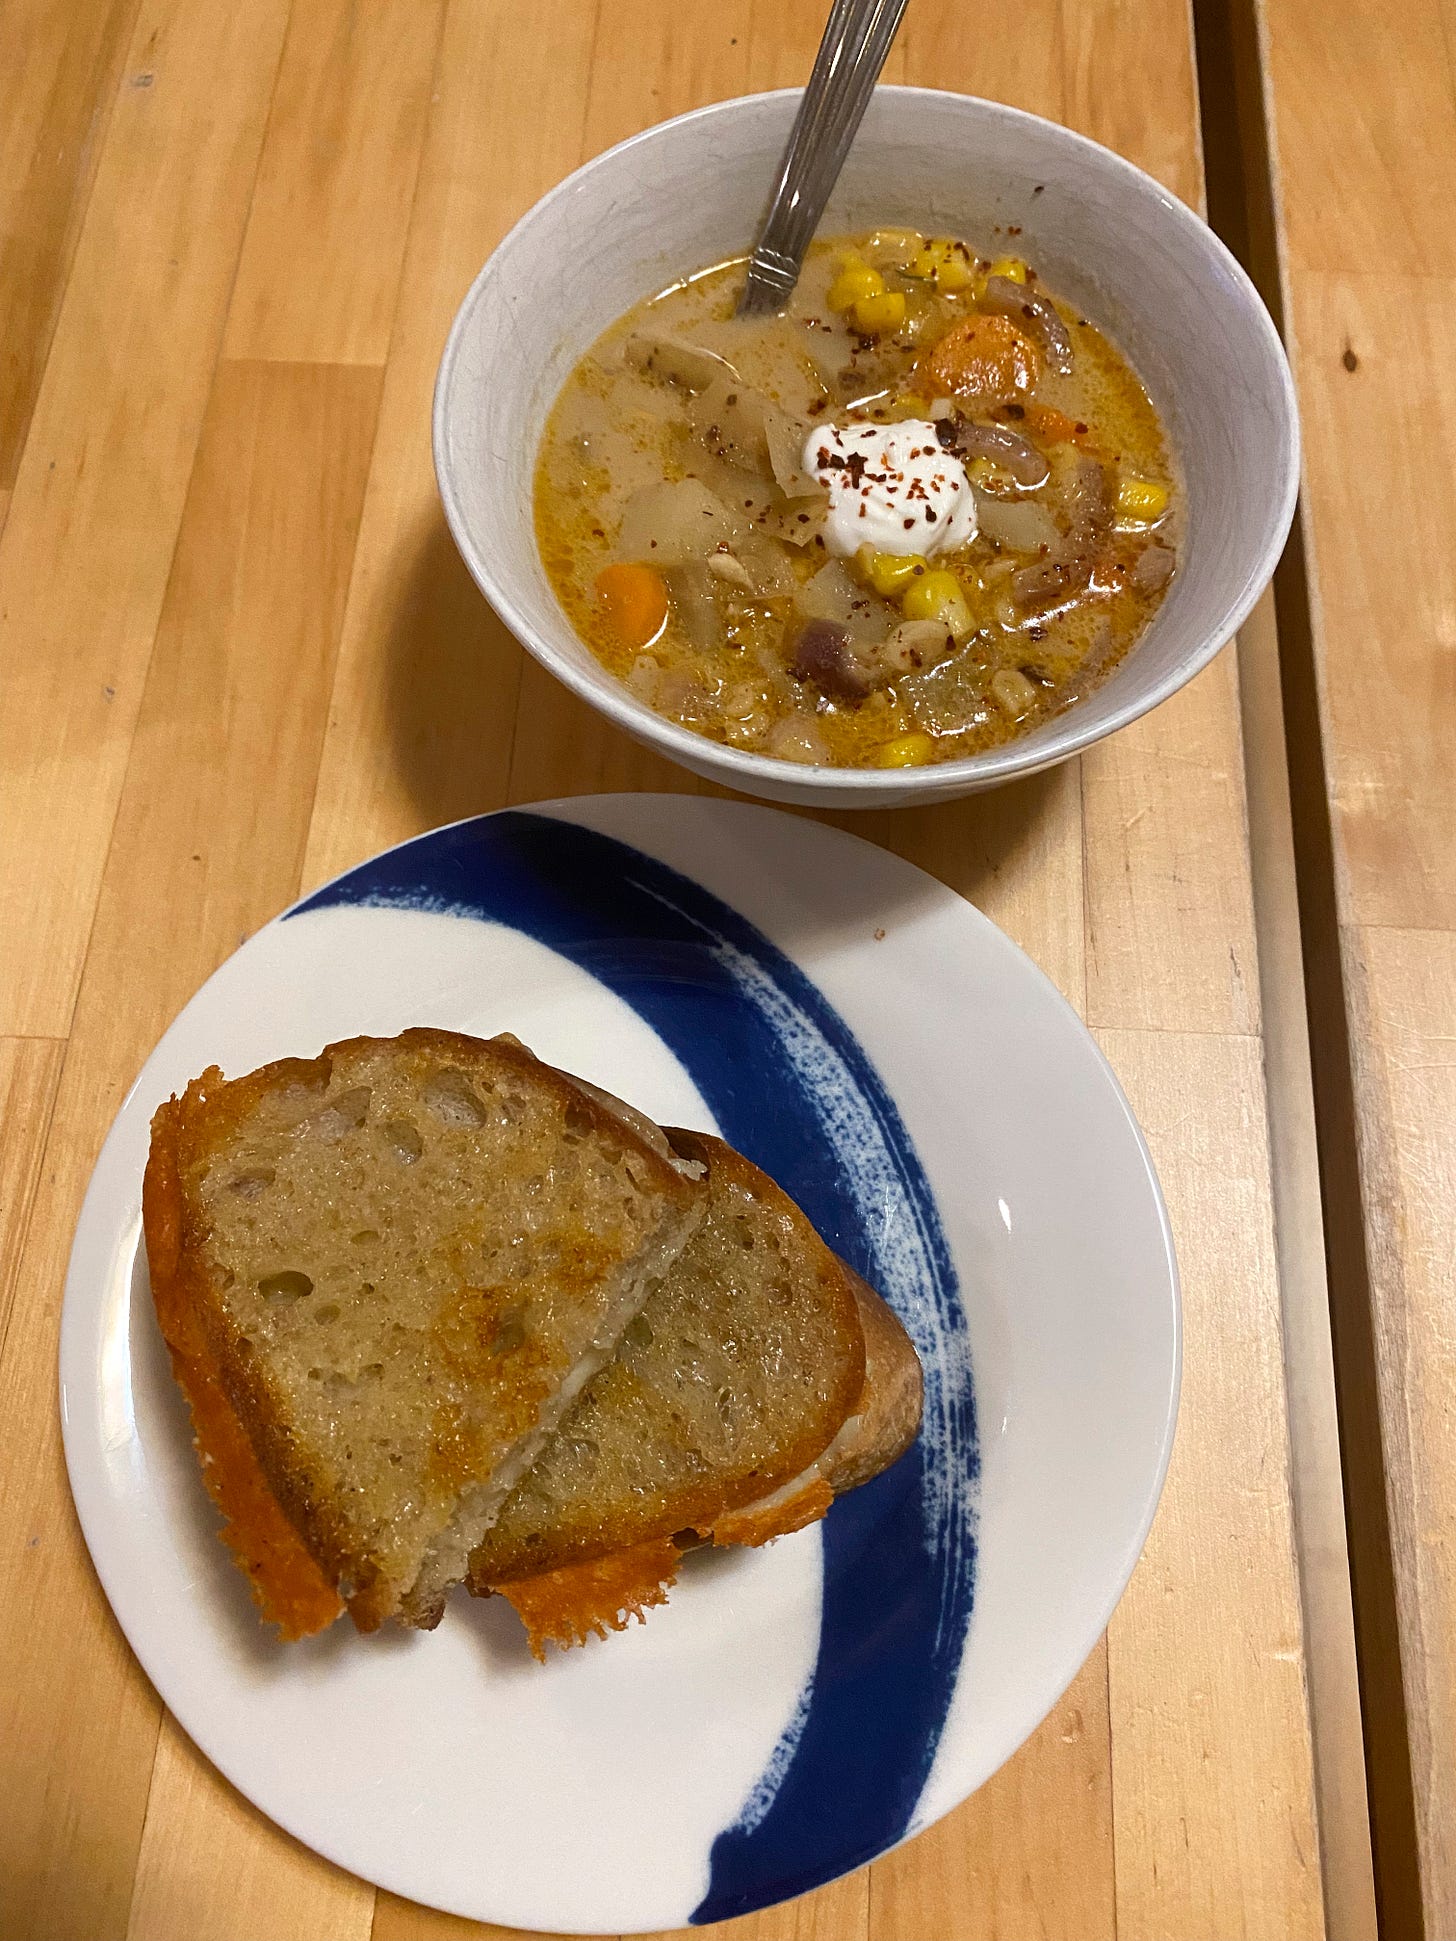 A small blue and white plate with two halves of a grilled cheese sandwich is in the foreground. Cheese has formed a crispy lattice at one edge of the bread. Behind the plate is a small white bowl filled with corn chowder, with chili flakes and a dollop of yogurt on top.